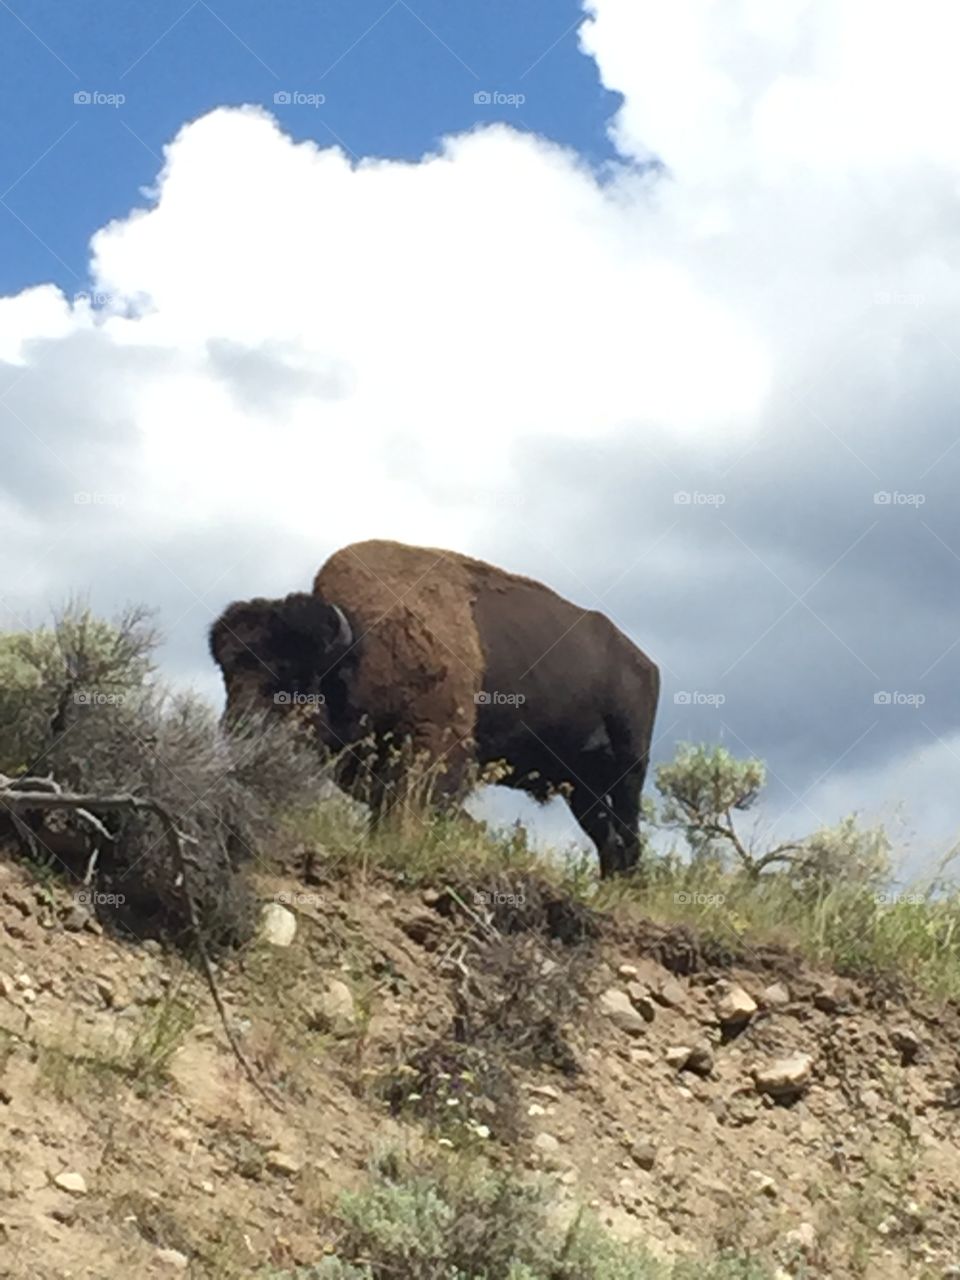 A Bison on the Bluff